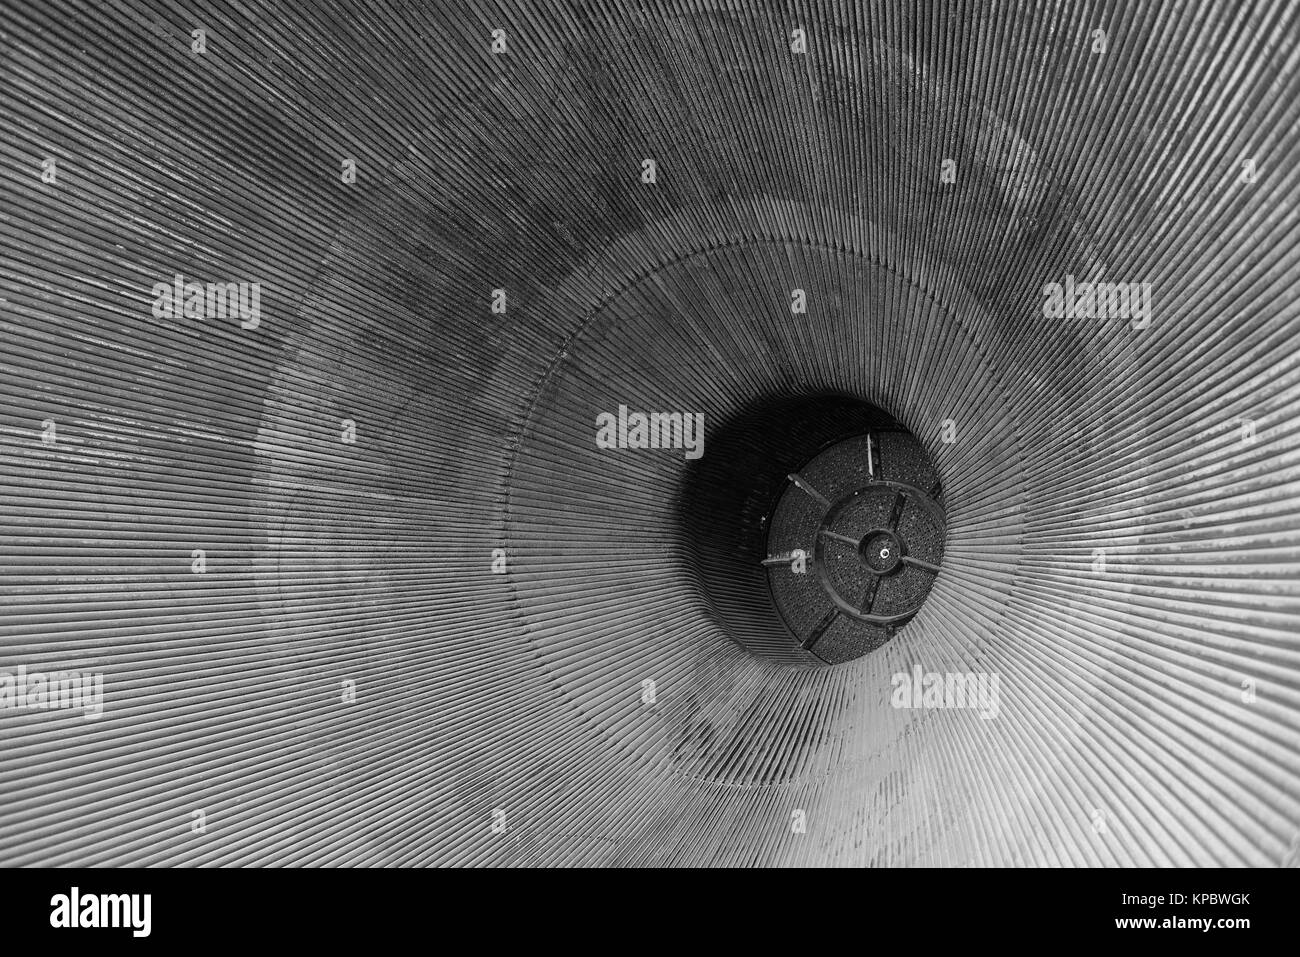 Interior close up of rocket engine booster cone assembly, circular cone shape with detail and textures Stock Photo